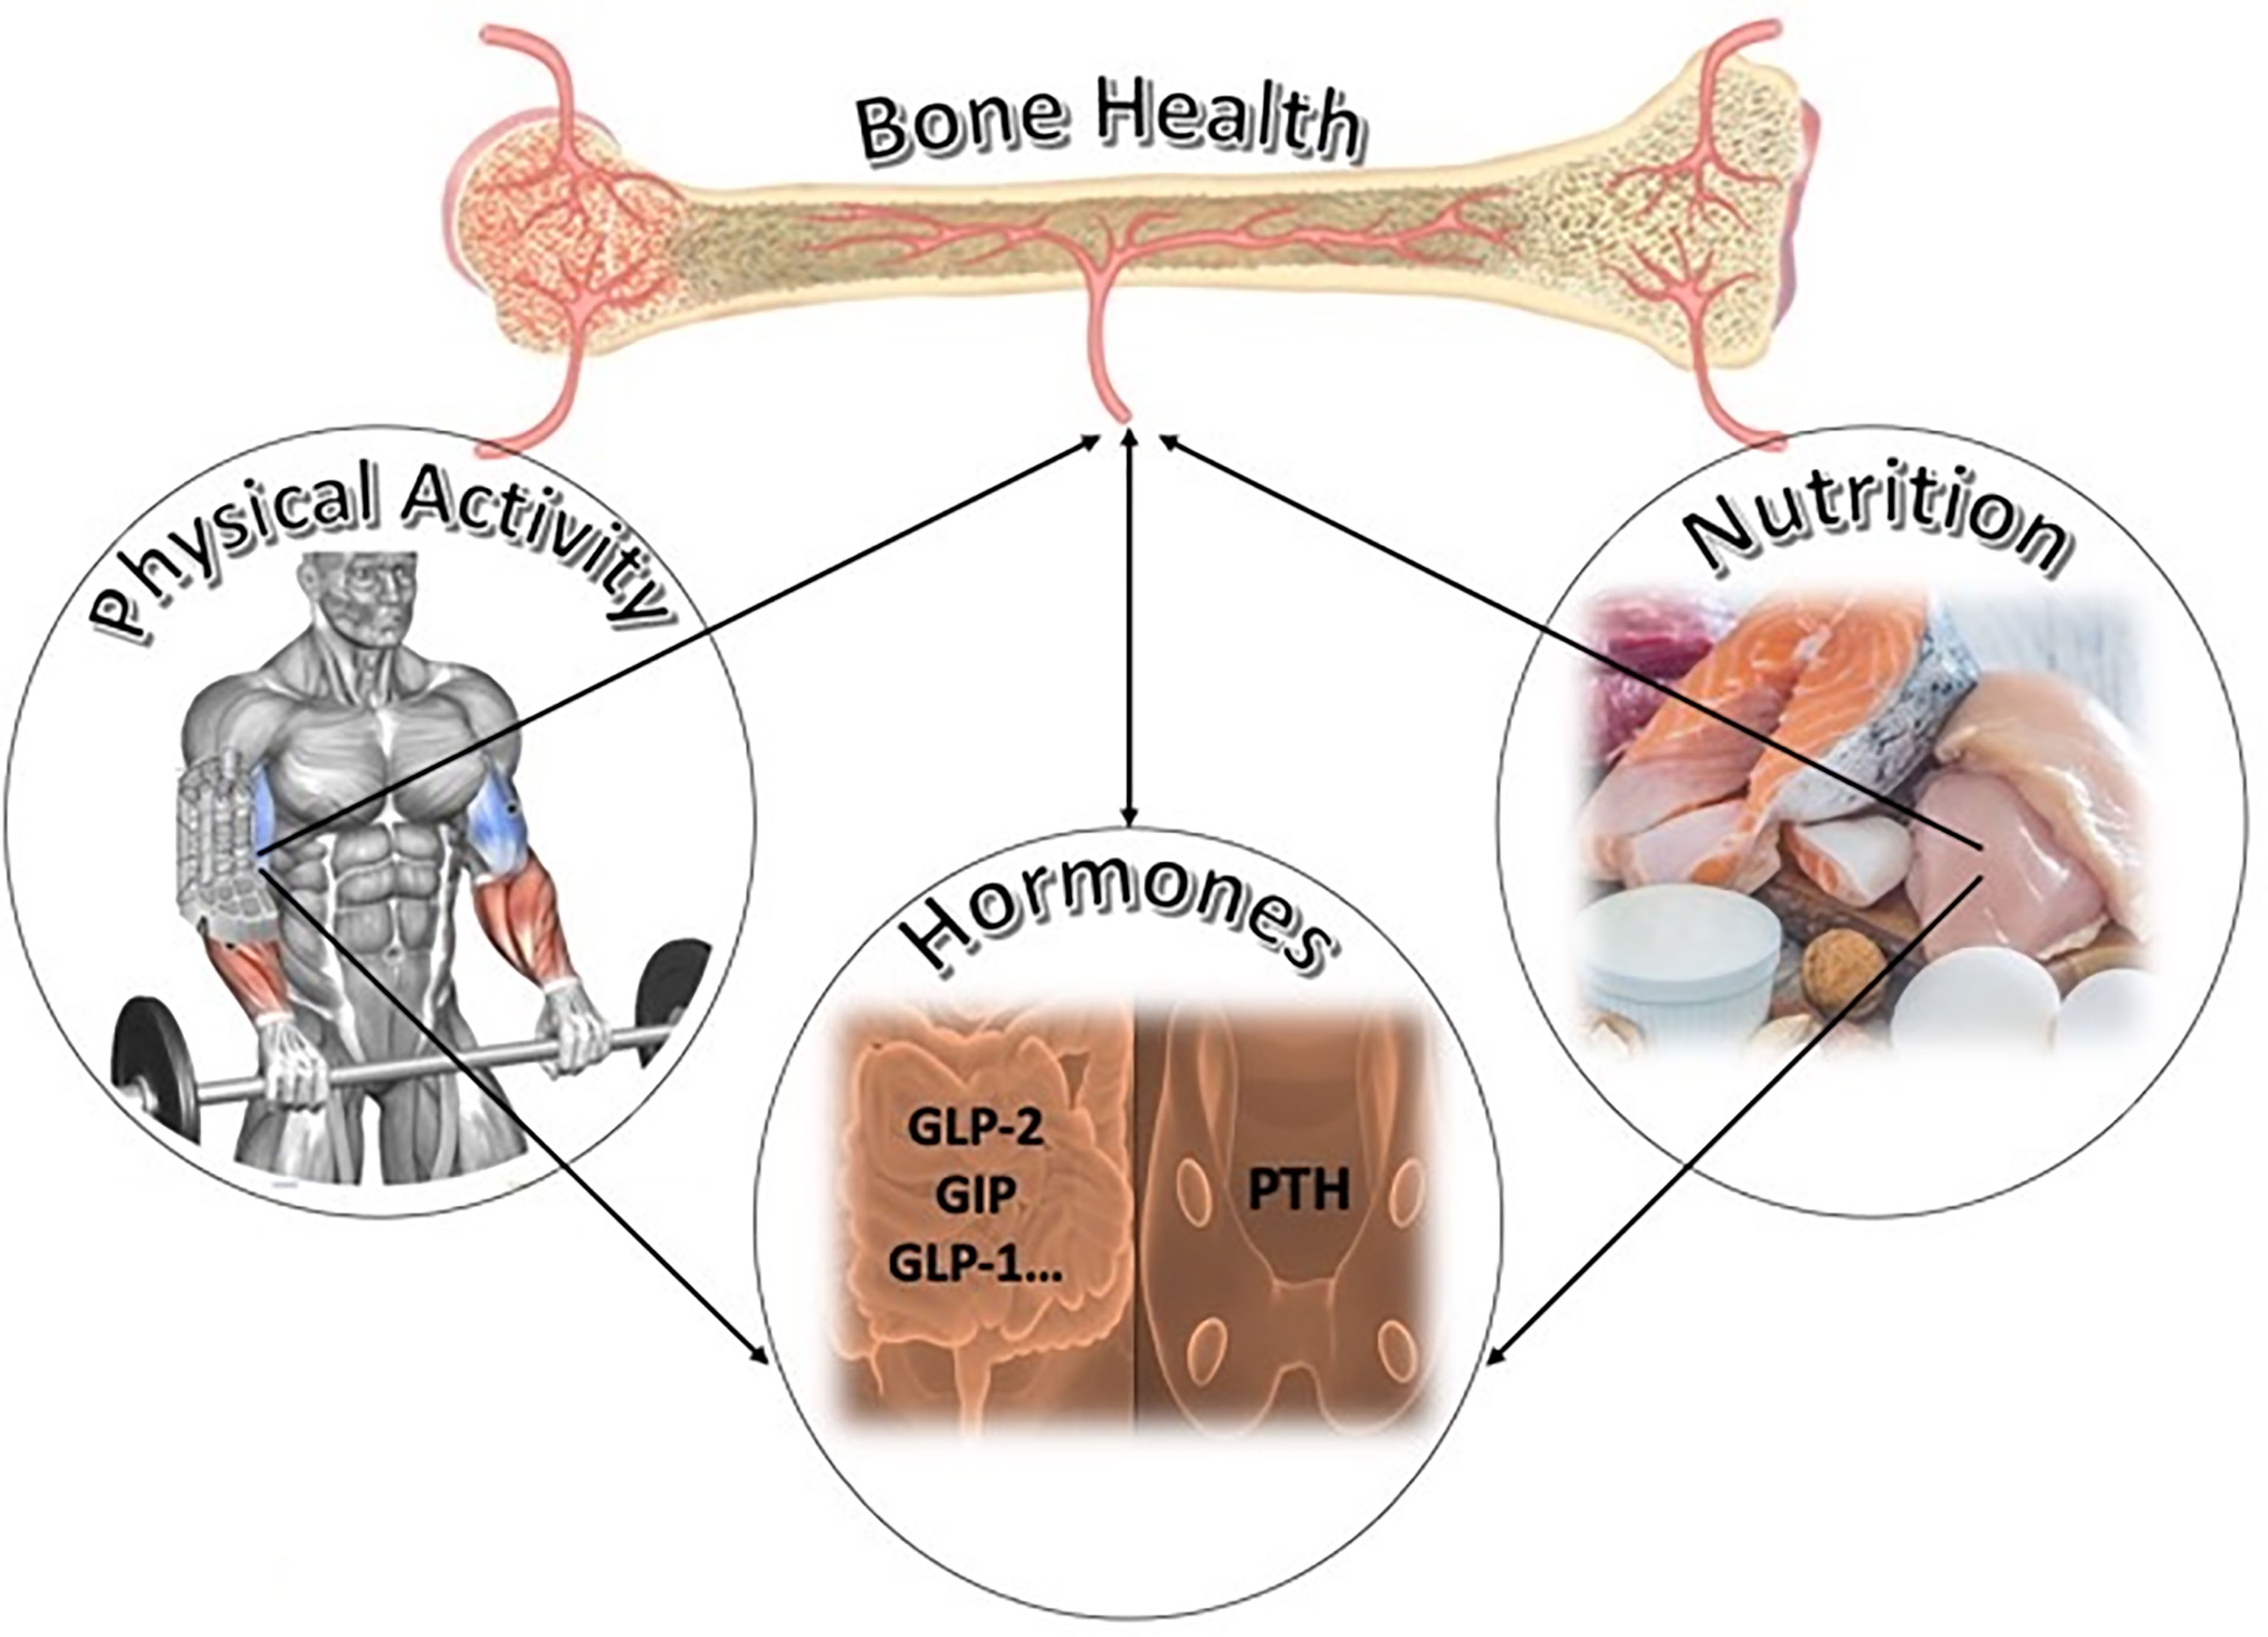 Carbohydrate and bone health